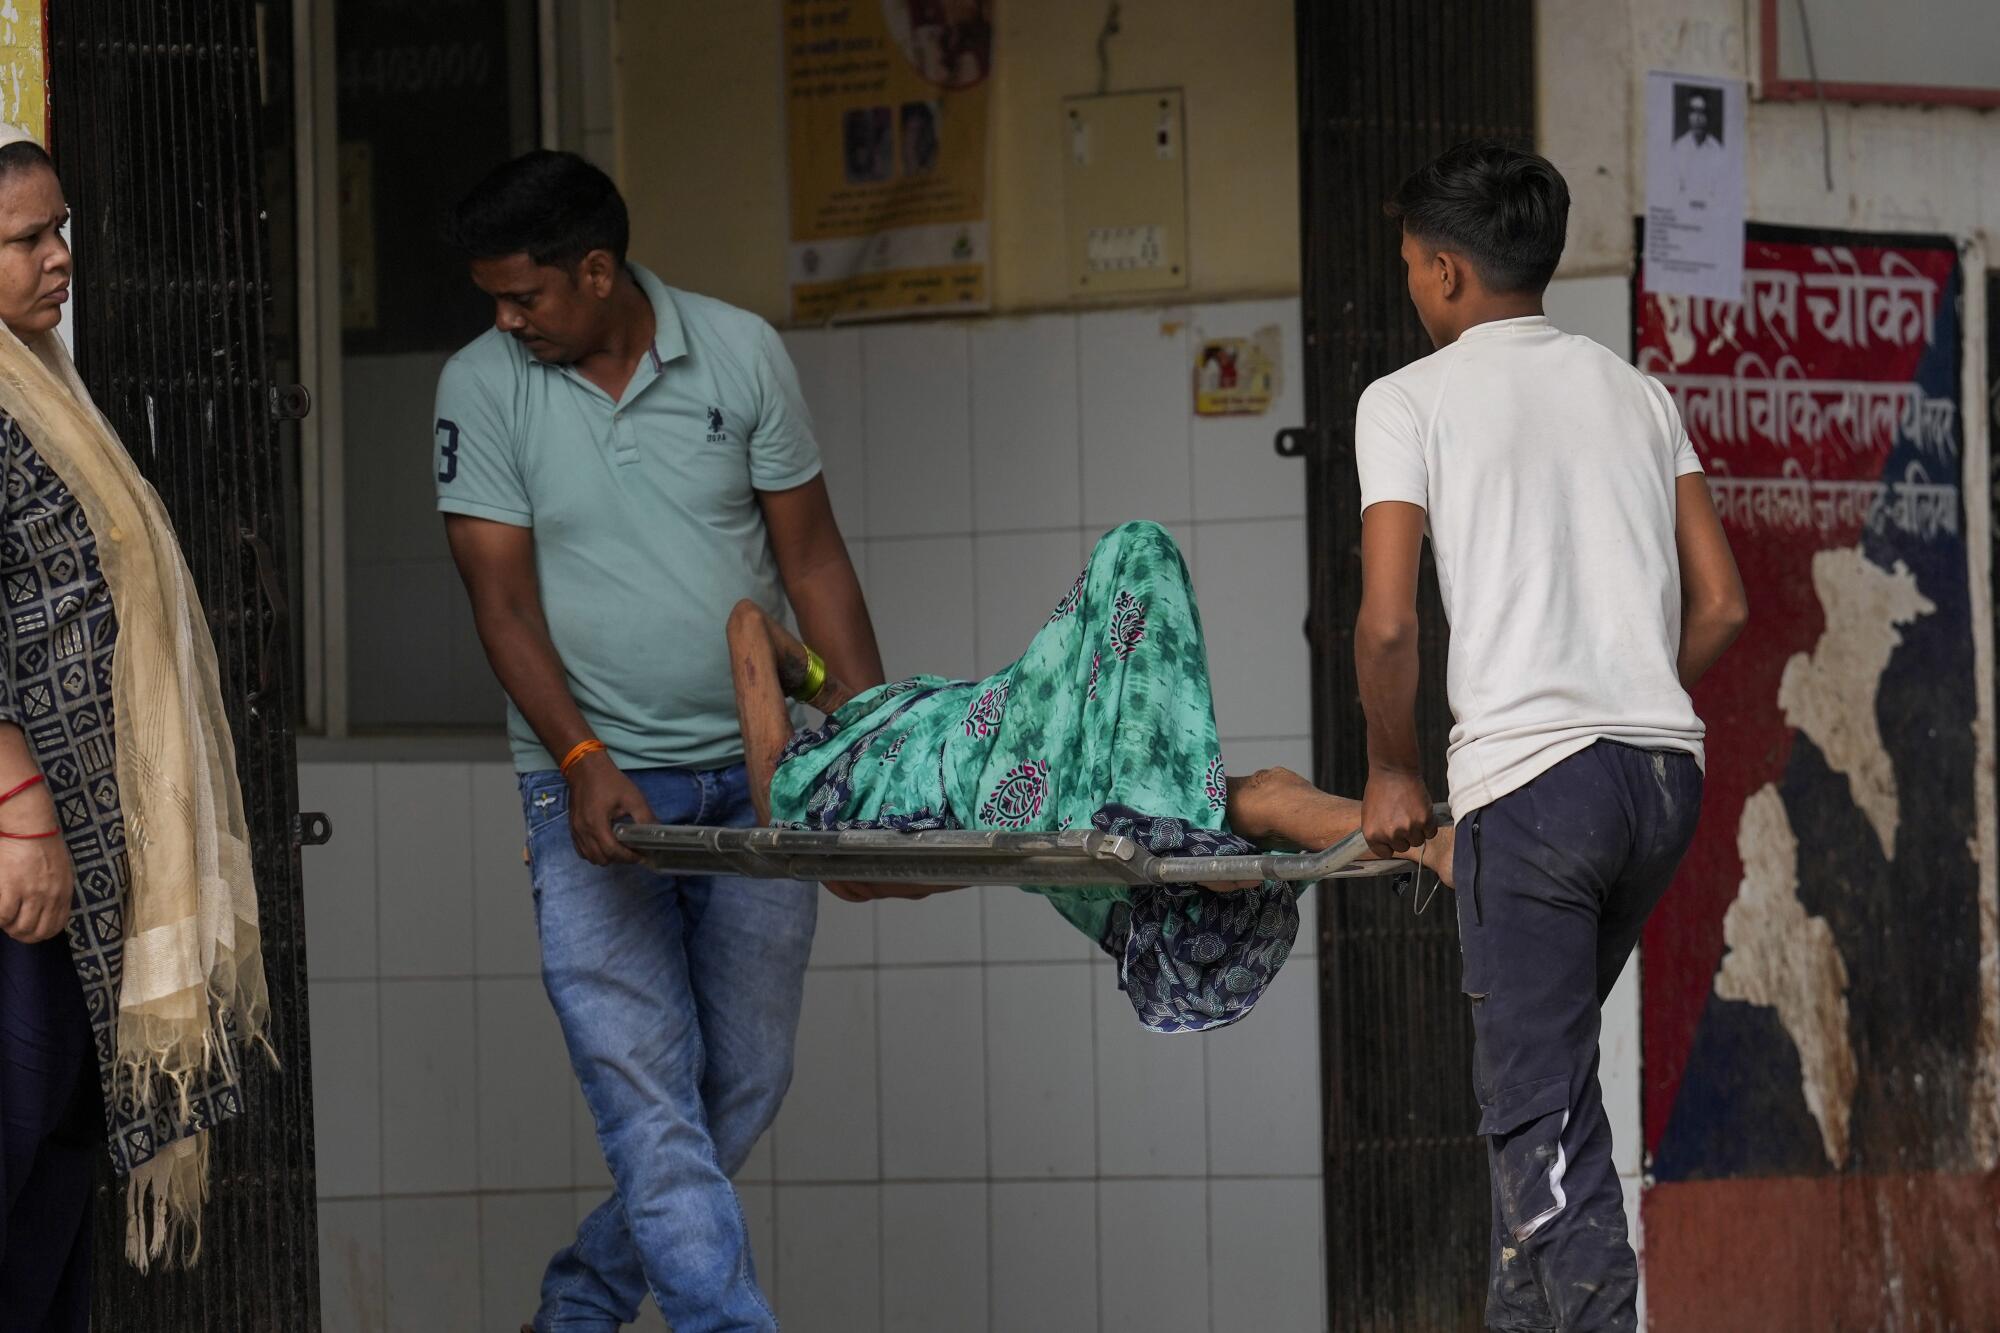 An elderly woman is carried on a stretcher into a hospital in India.